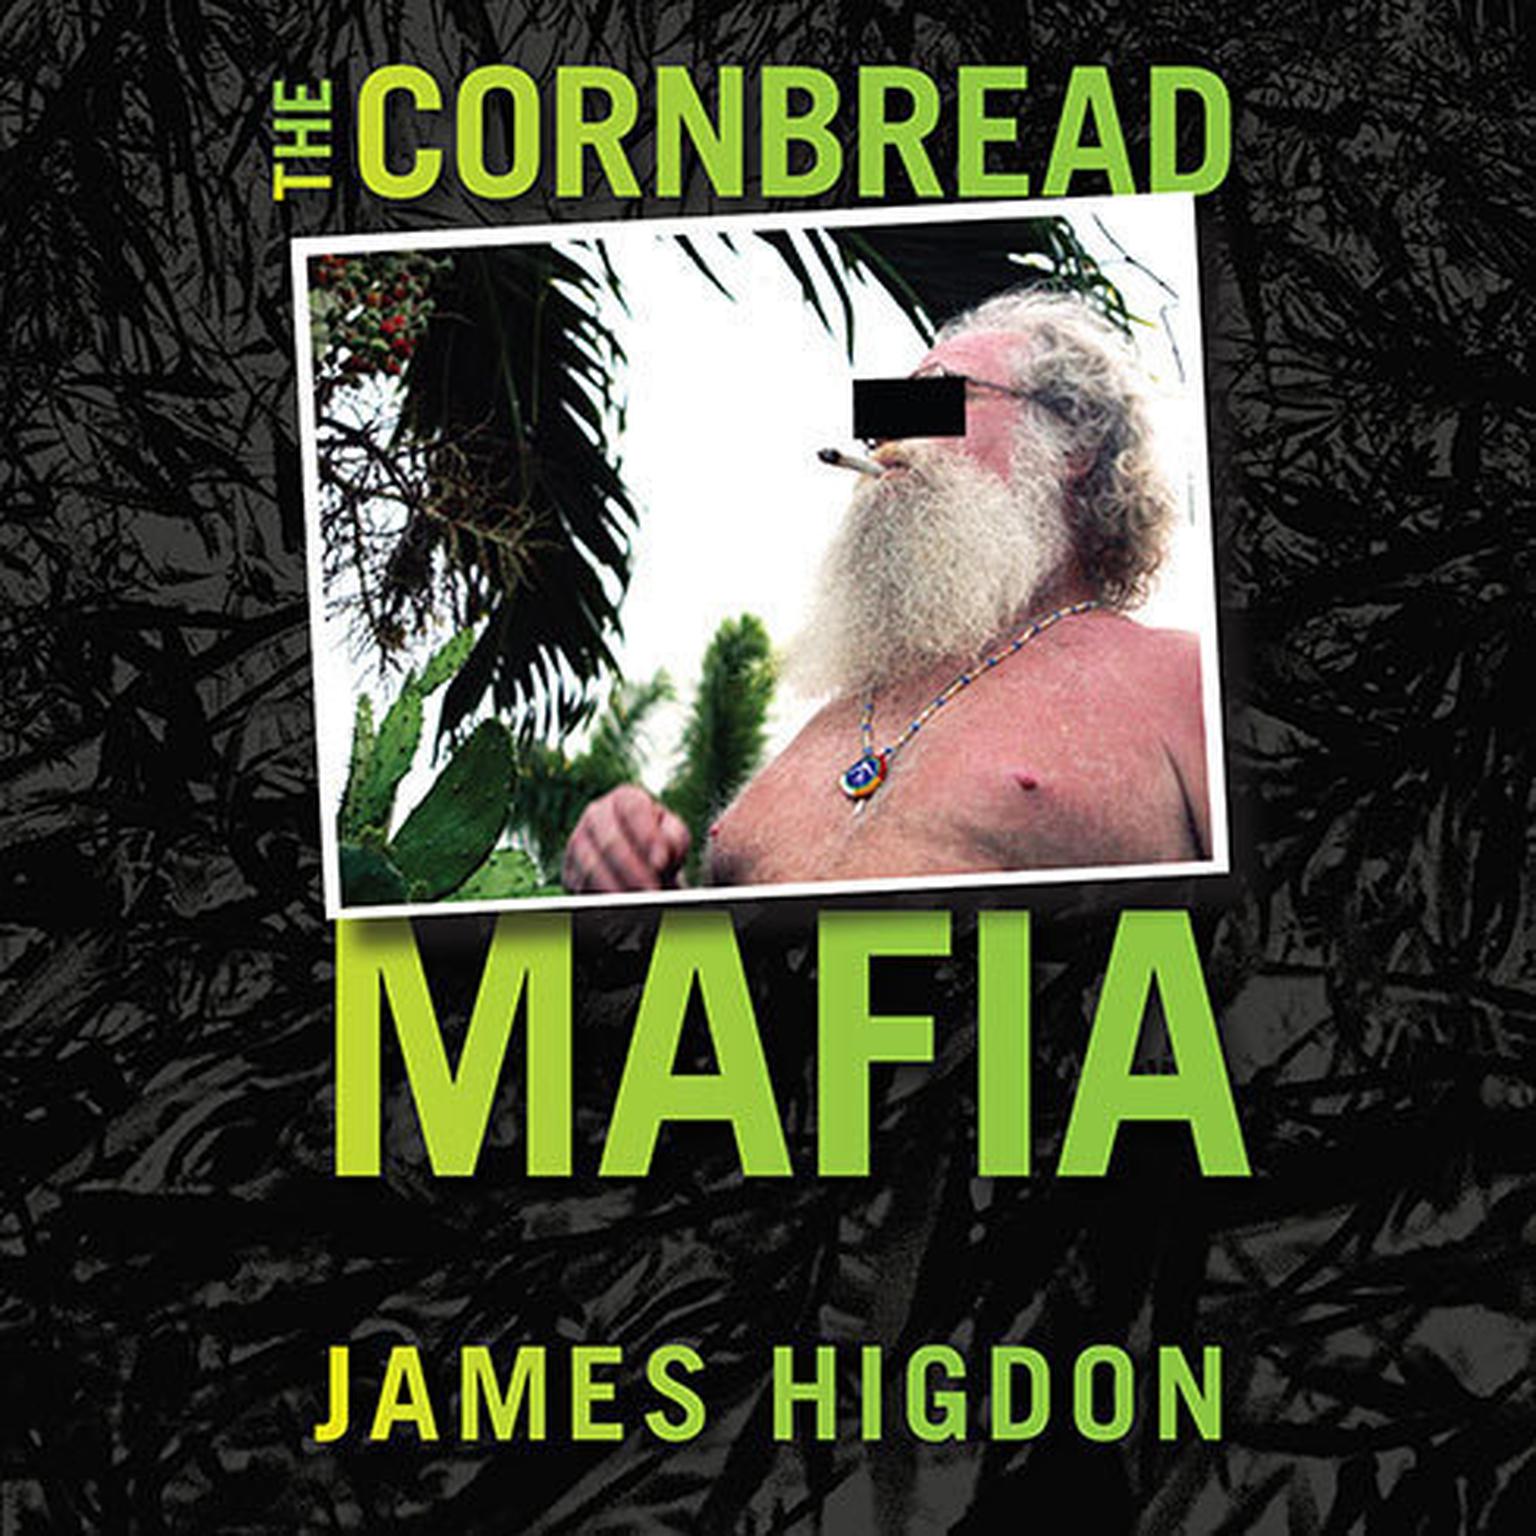 The Cornbread Mafia: A Homegrown Syndicates Code of Silence and the Biggest Marijuana Bust in American History Audiobook, by James Higdon